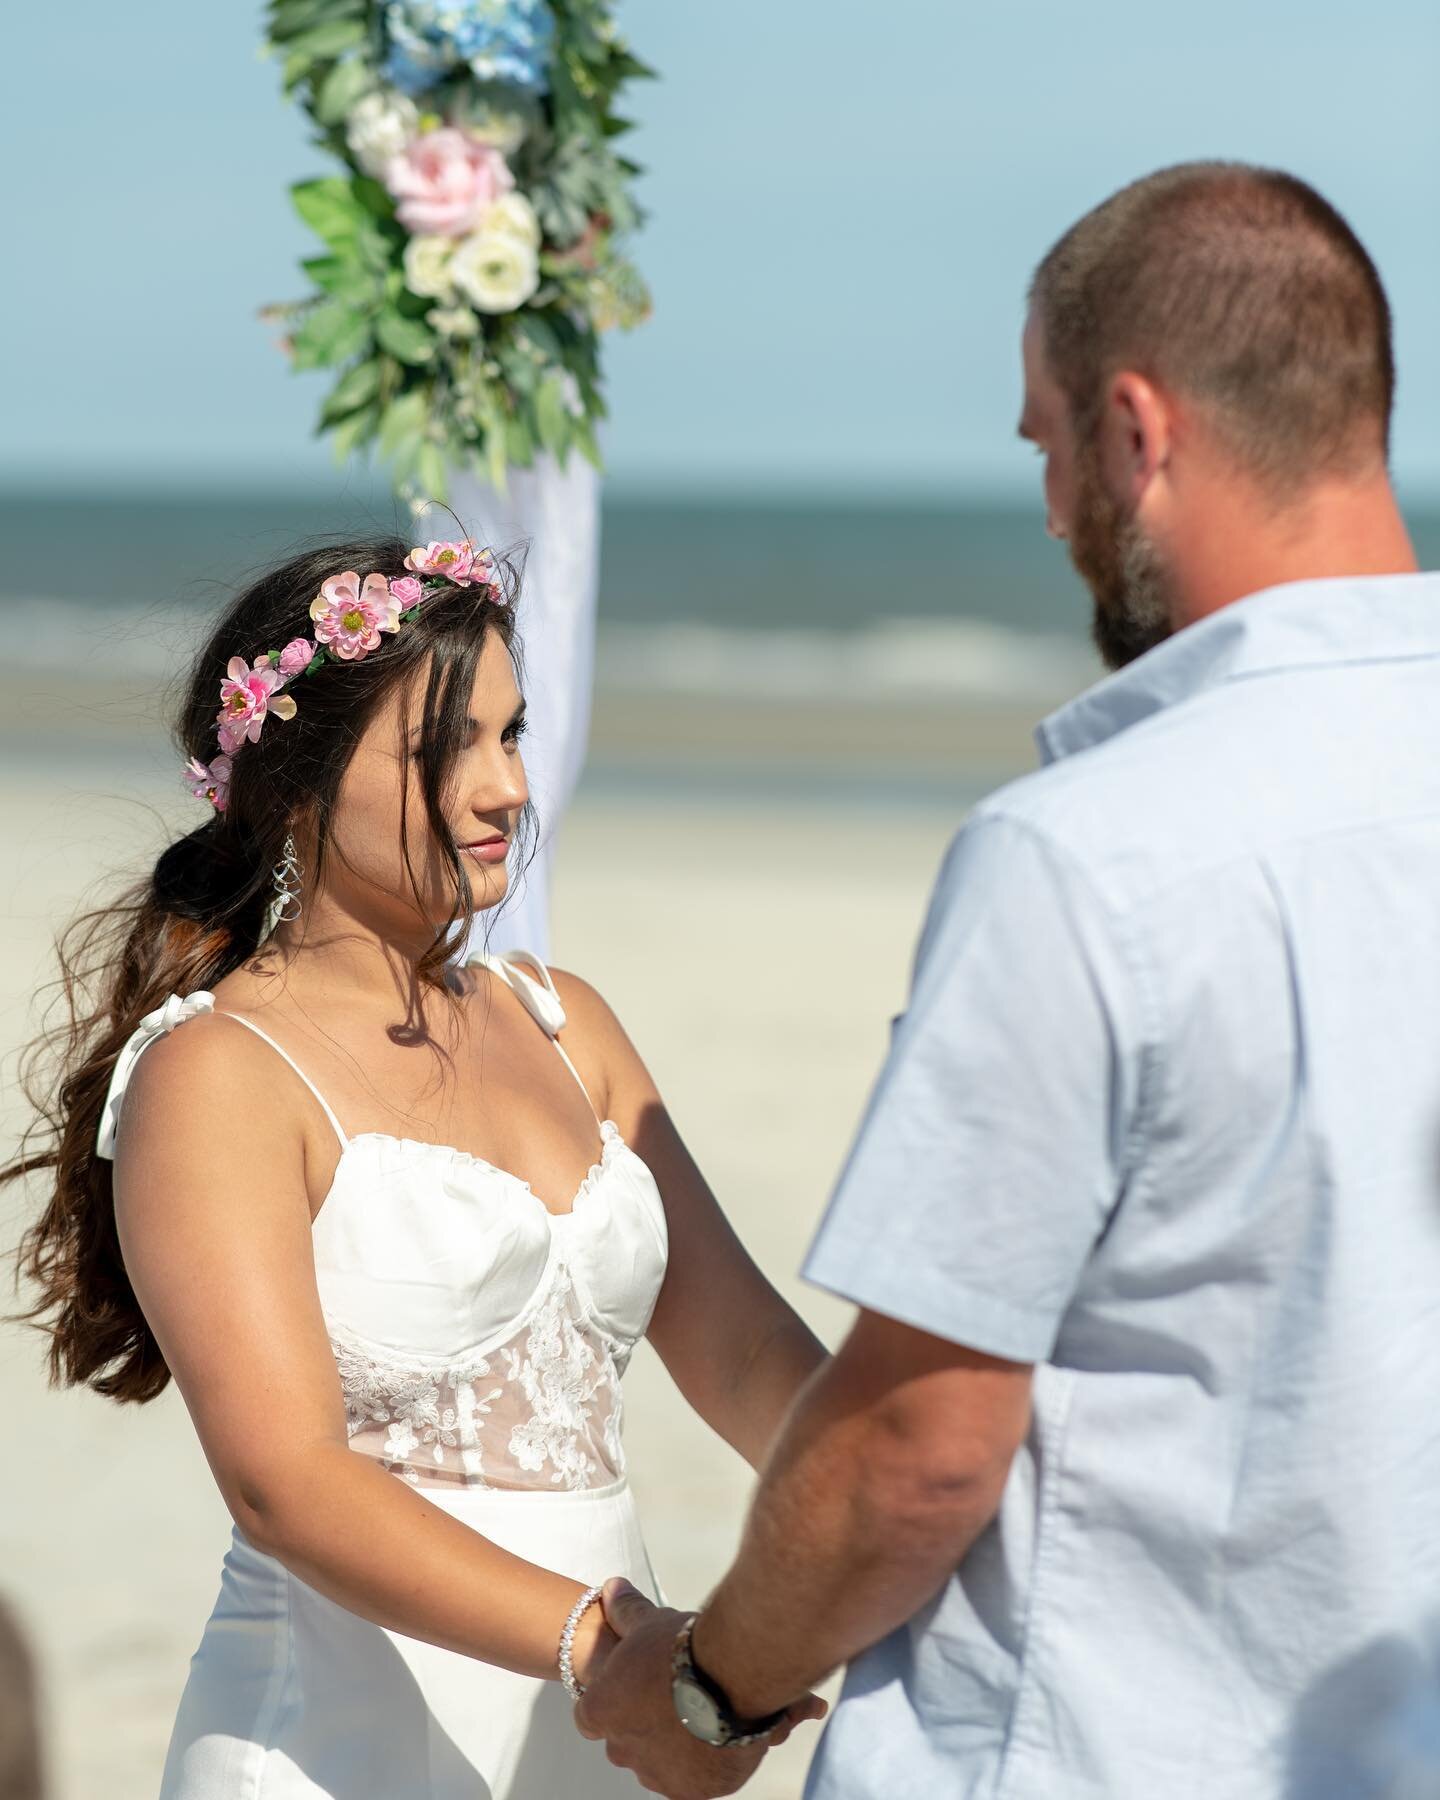 What a great little beach wedding! @photography46llc  #weddingday #tiedtheknot #hitched #weddingphotography #photographer #hiltonheadwedding #beachphotography